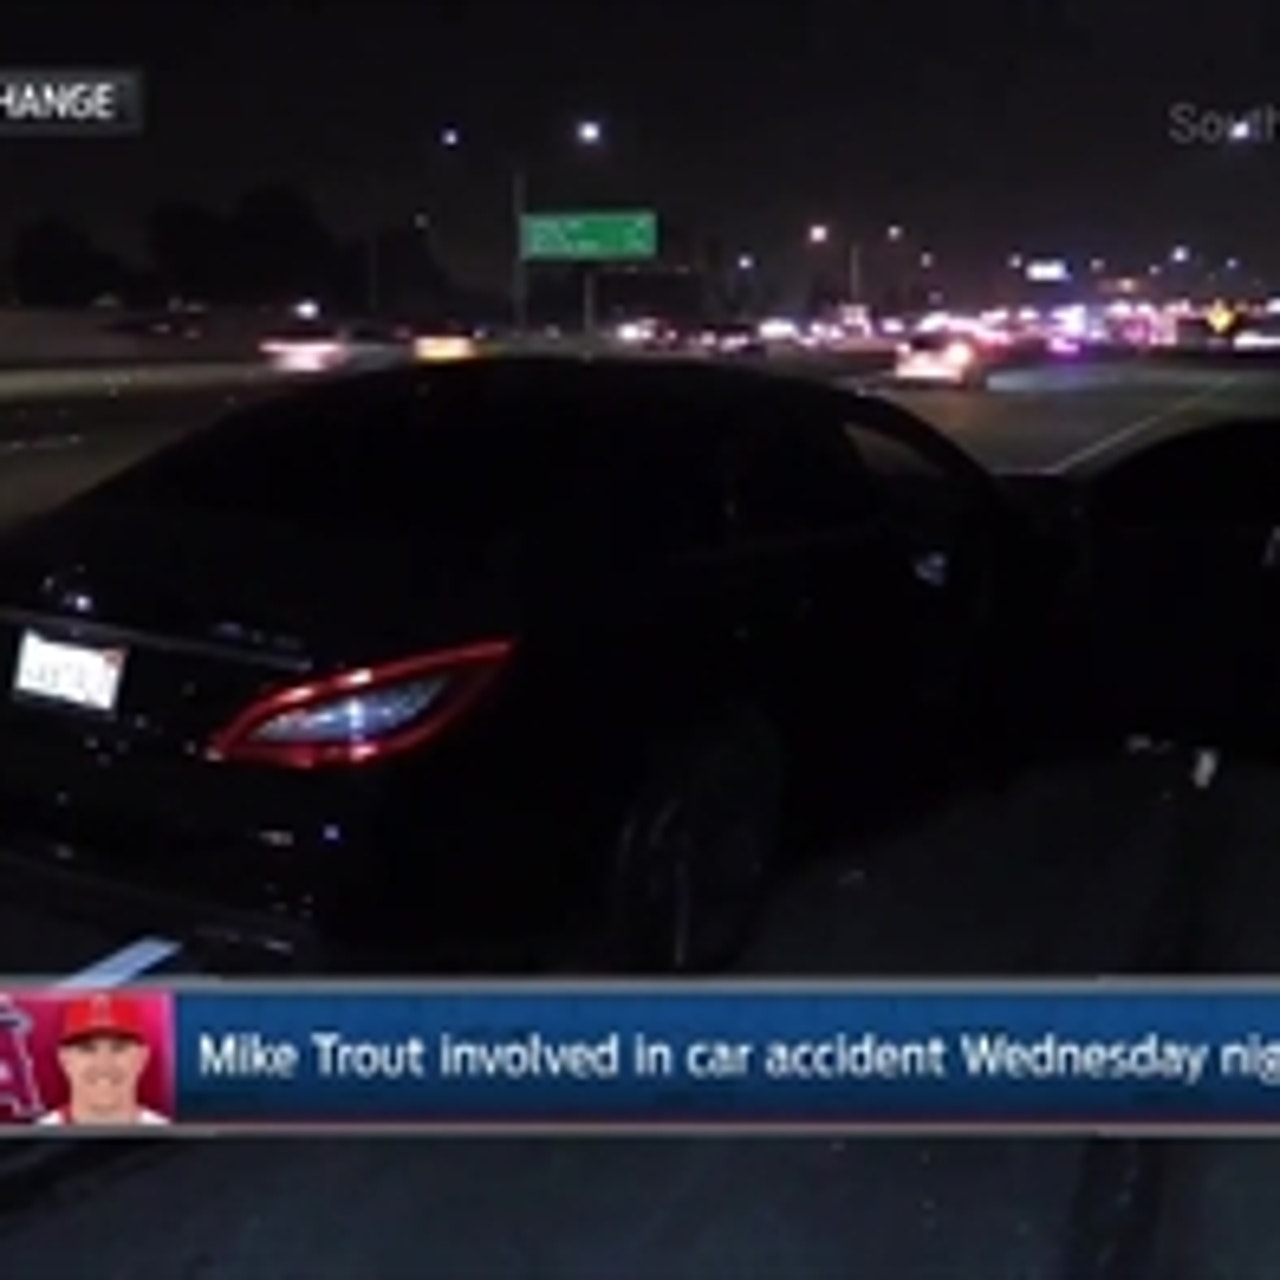 Mike Trout involved in auto accident late Wednesday night